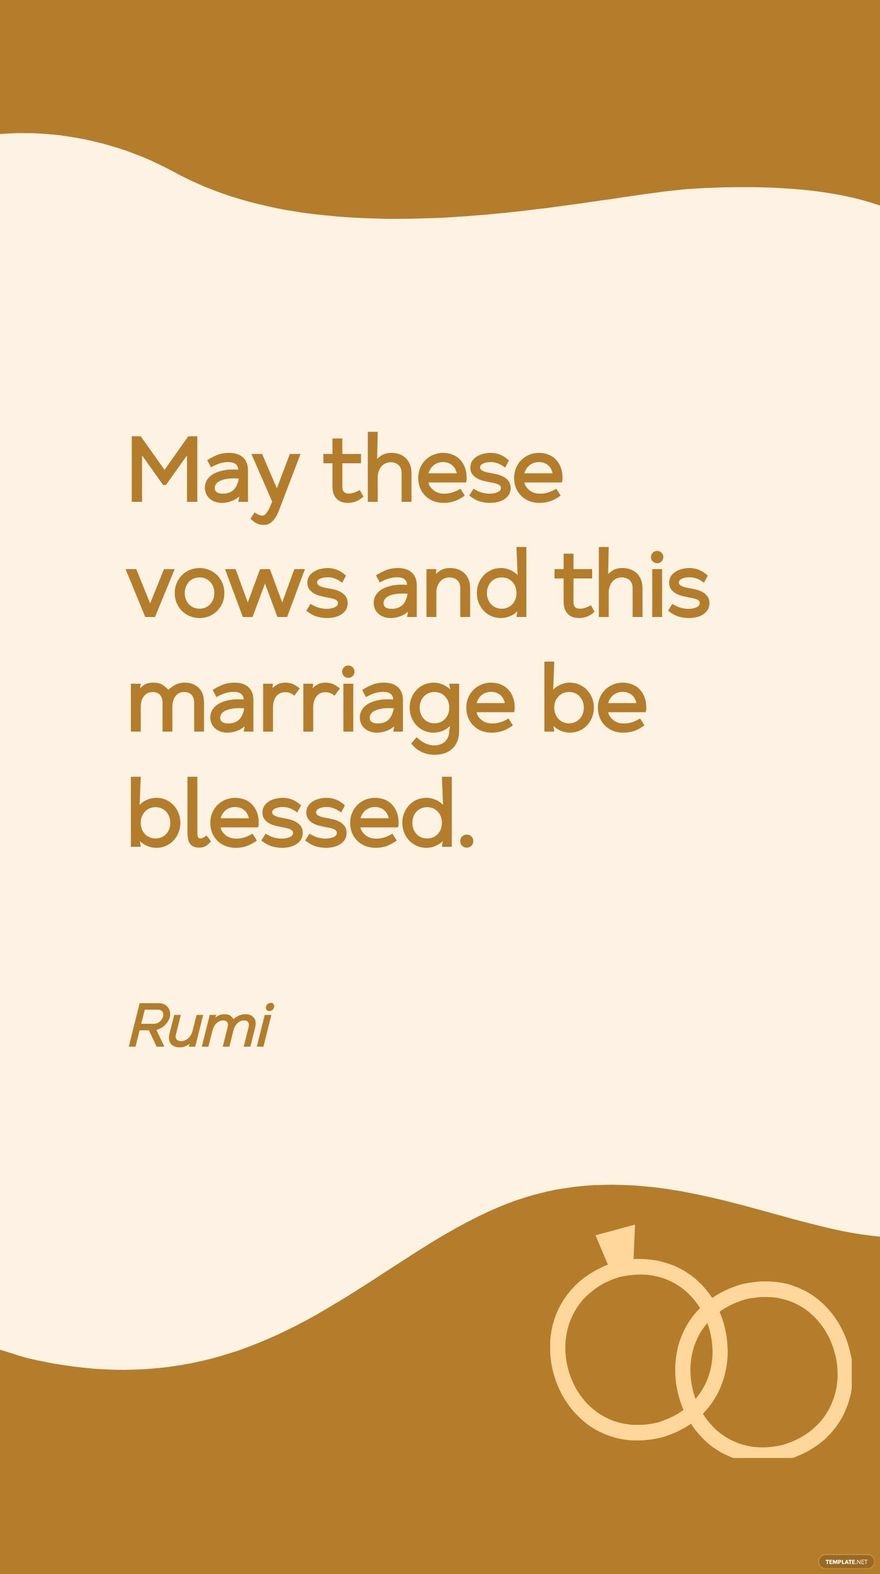 Rumi - May these vows and this marriage be blessed.